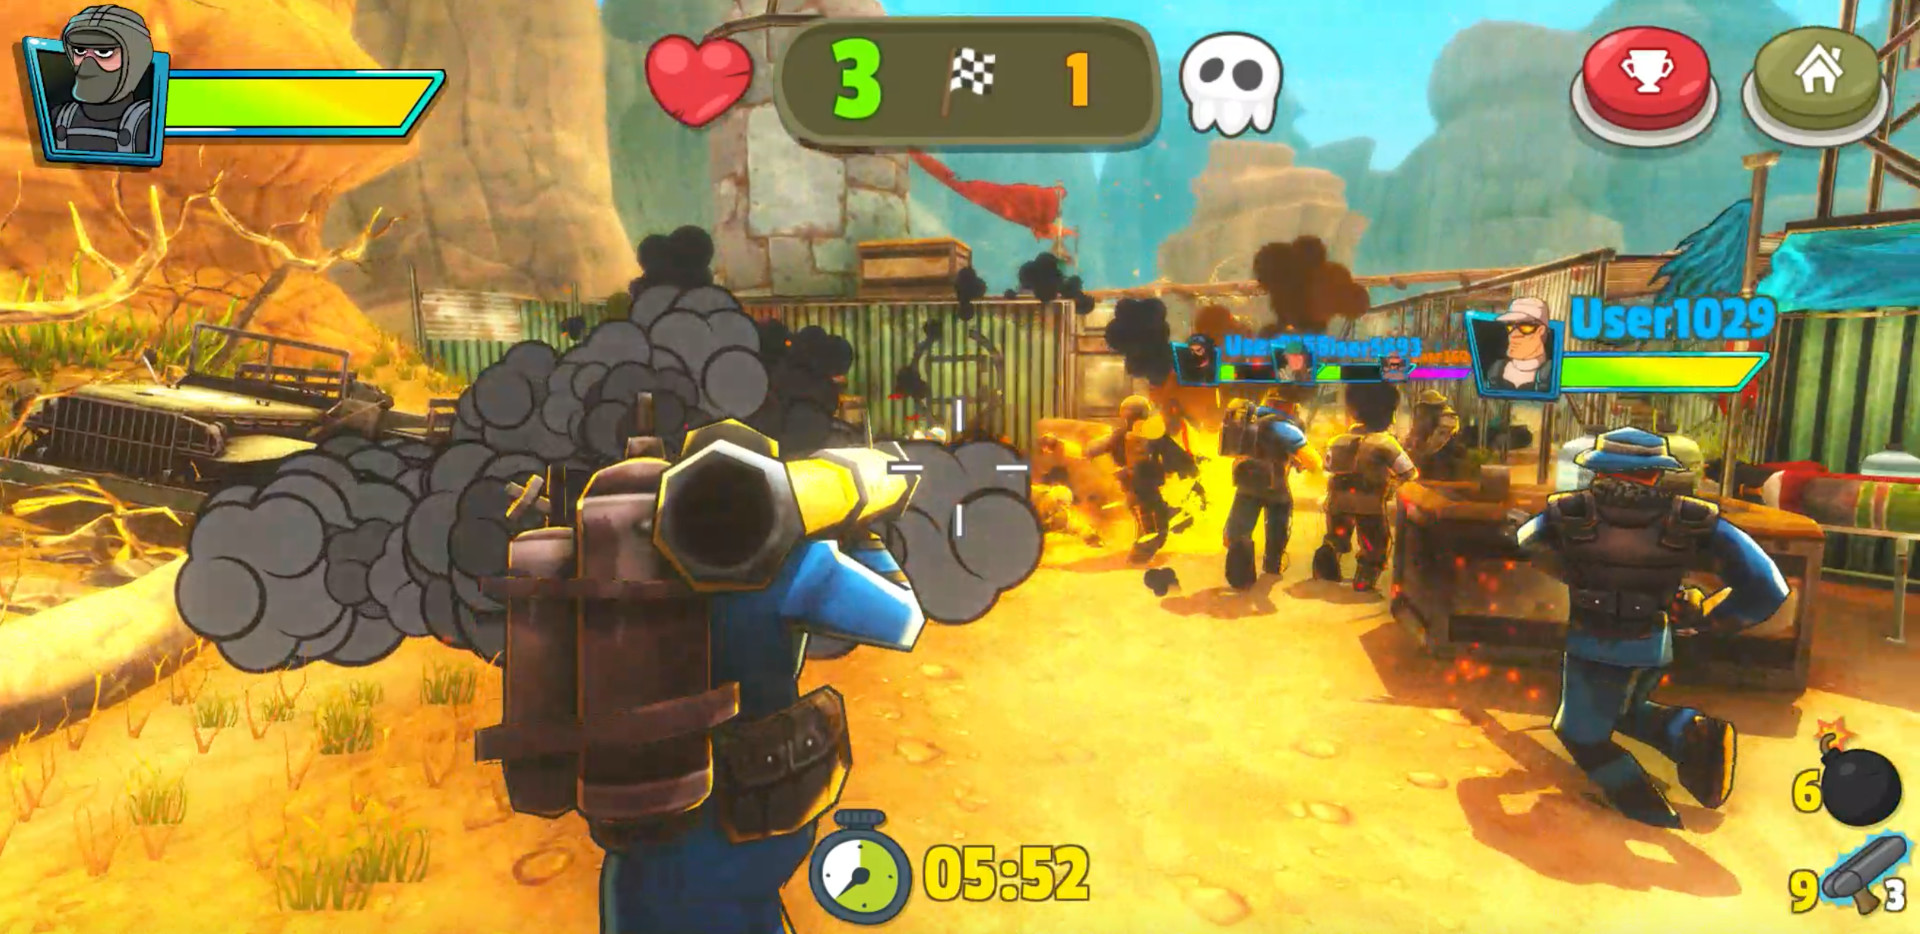 The Undisputables : Online Multiplayer Shooter on Steam